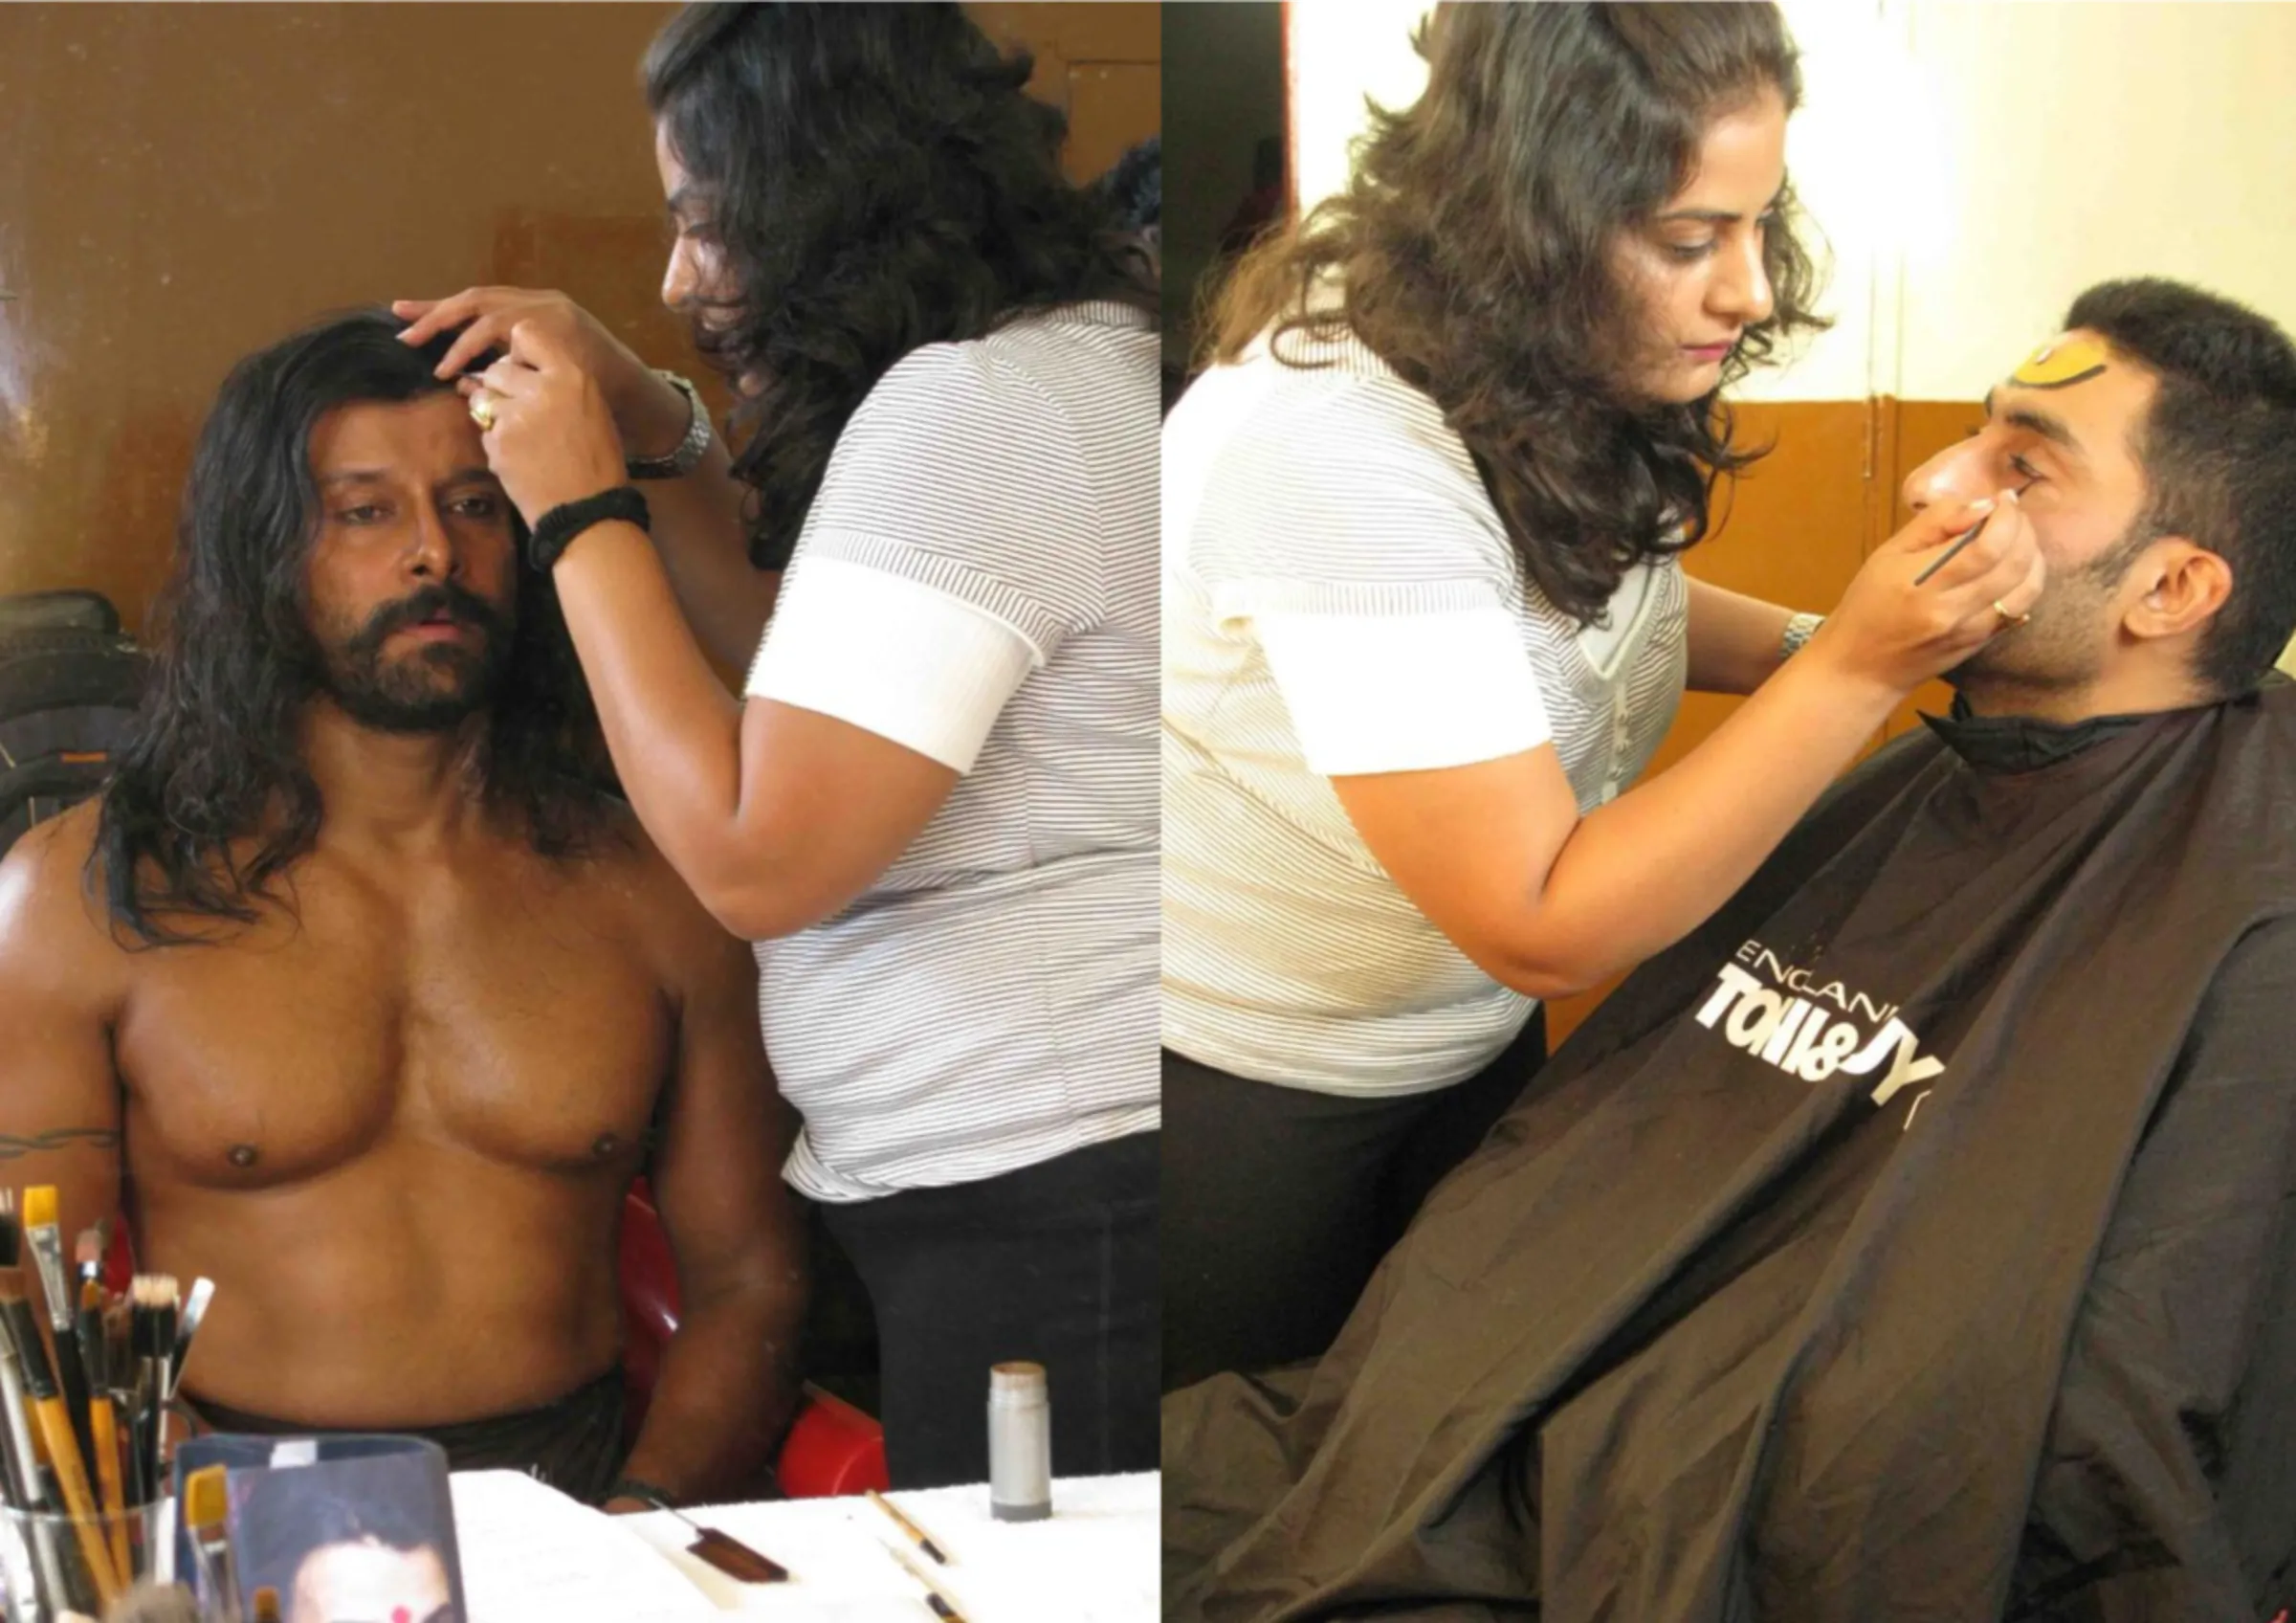 Make-up artist Charu Khurana whose supreme court case against the Cine Costume Make-up Artists and Hair Dressers Association won rights for female makeup artists to work on film sets in Mumbai in 2014, pictured doing make up for actor Vikram (L) and Abhishek Bachchan (R) in an undated photograph, Charu Khurana/ Handout via REUTERS